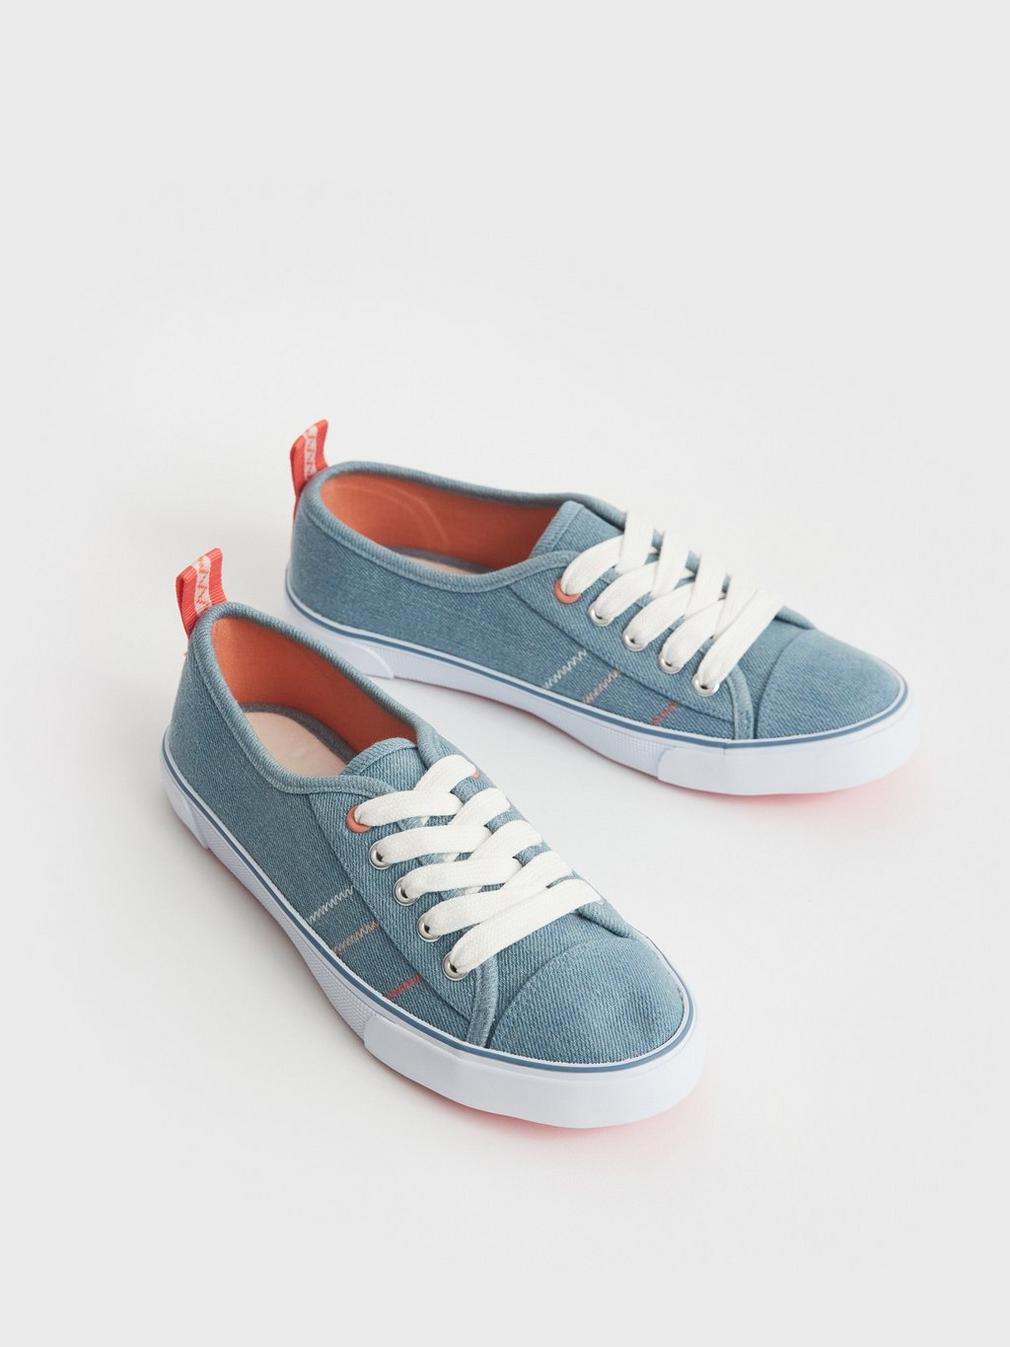 Piper Plimsoll in CHAMB BLUE - FLAT FRONT